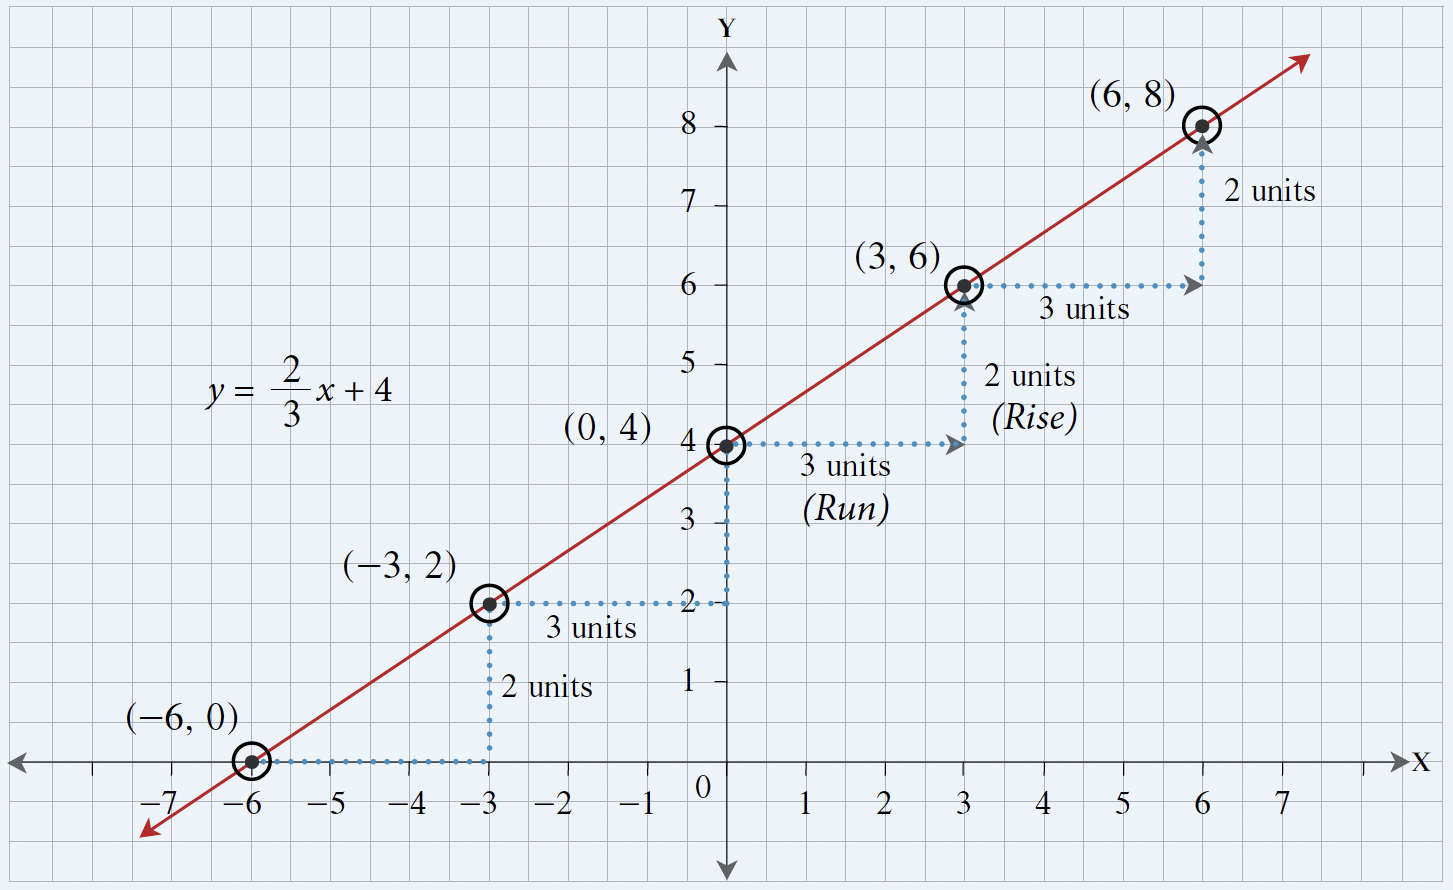 Example 8.2-c_Solution plotted on a graph as described in solution text.